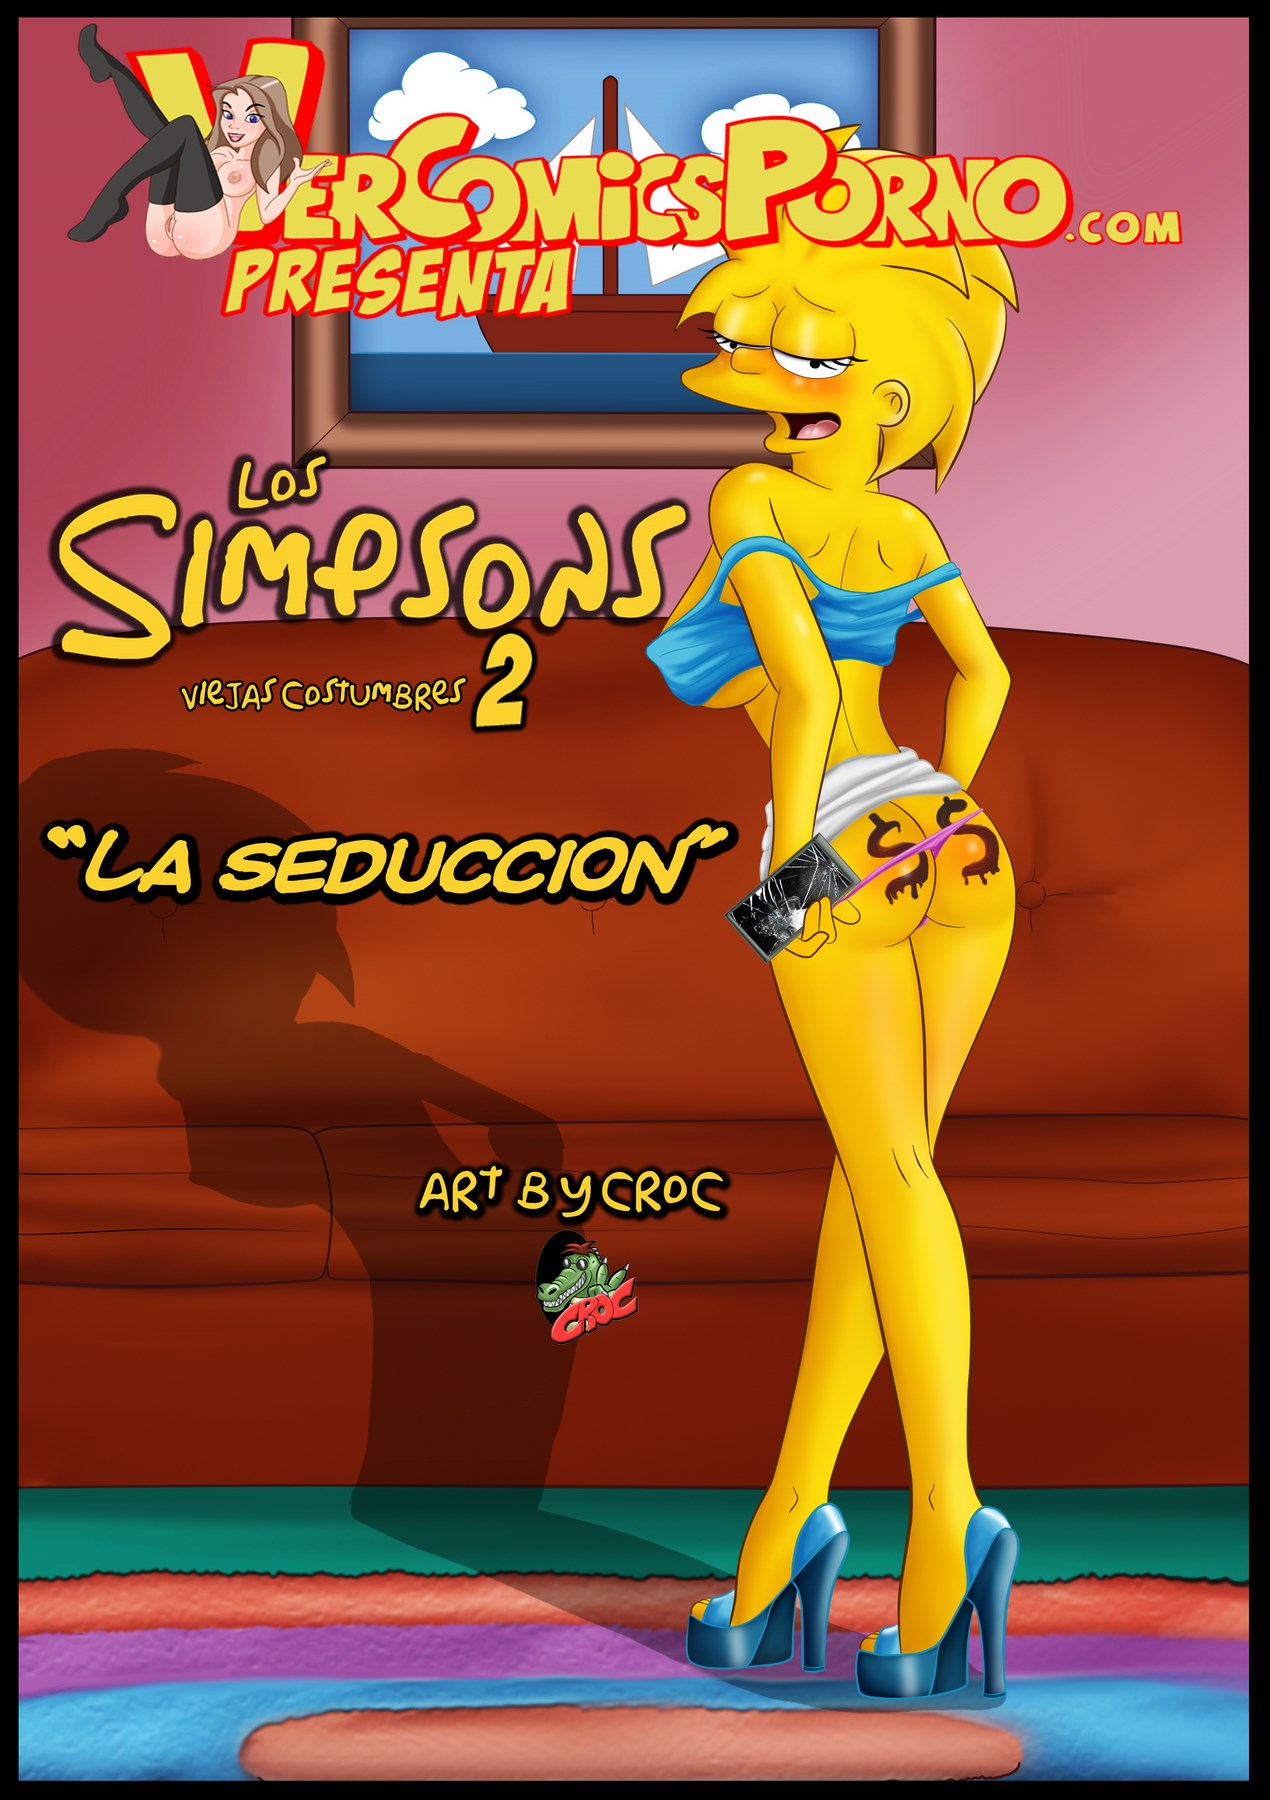 The simpsons naked comic